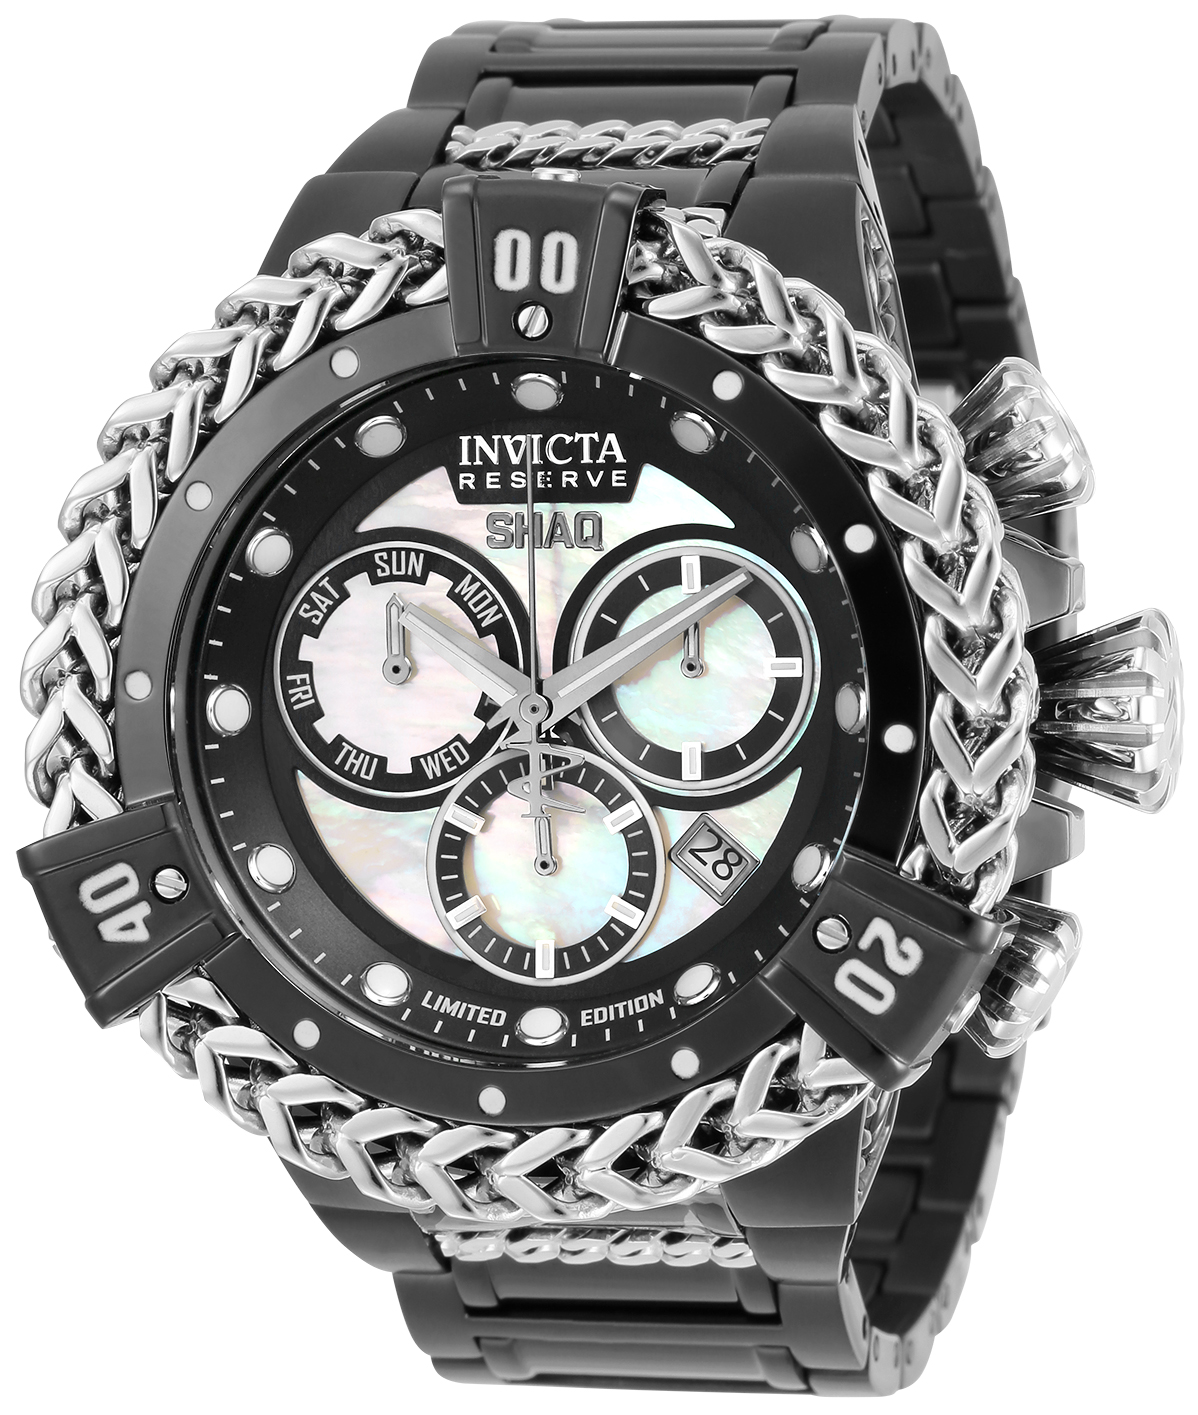 Invicta SHAQ Men's Watch w/ Metal, Mother of Pearl & Oyster Dial - 53mm, Black, Steel (33412)